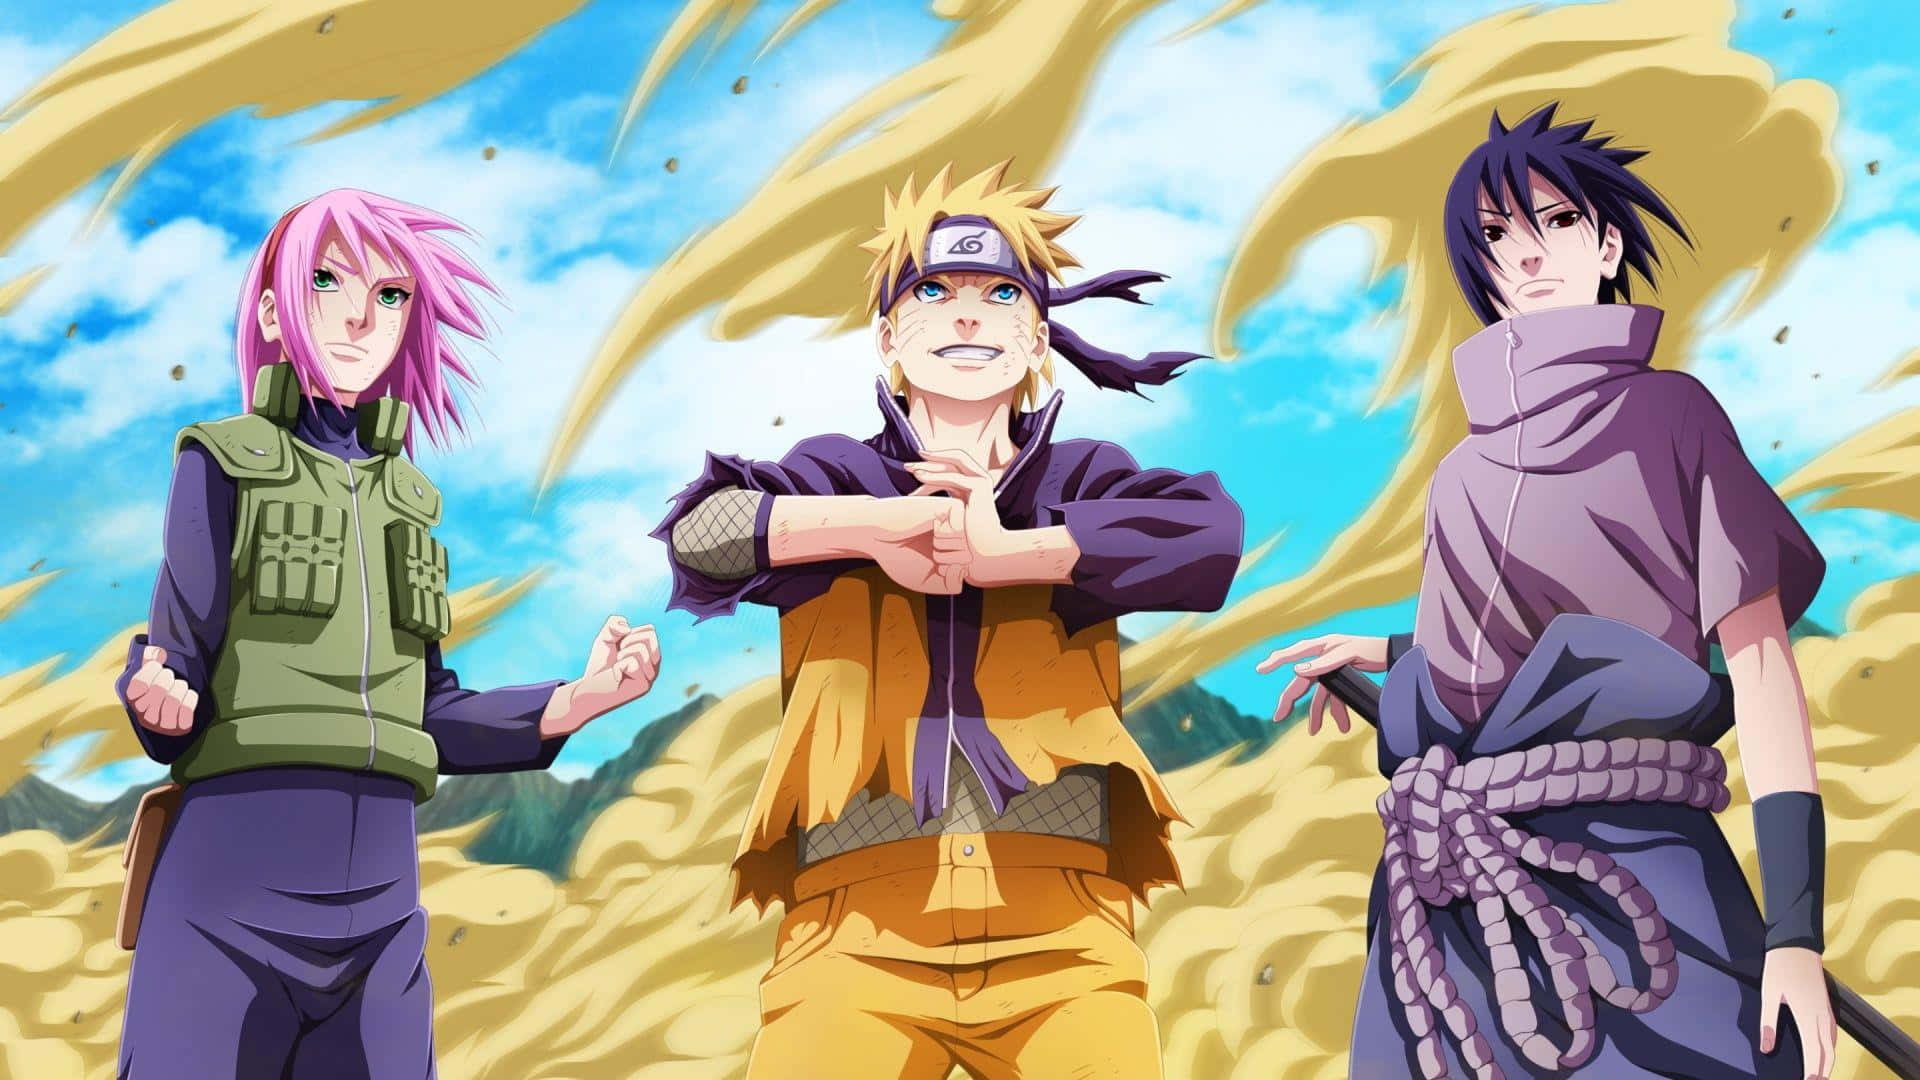 Caption: Naruto and friends celebrating together Wallpaper